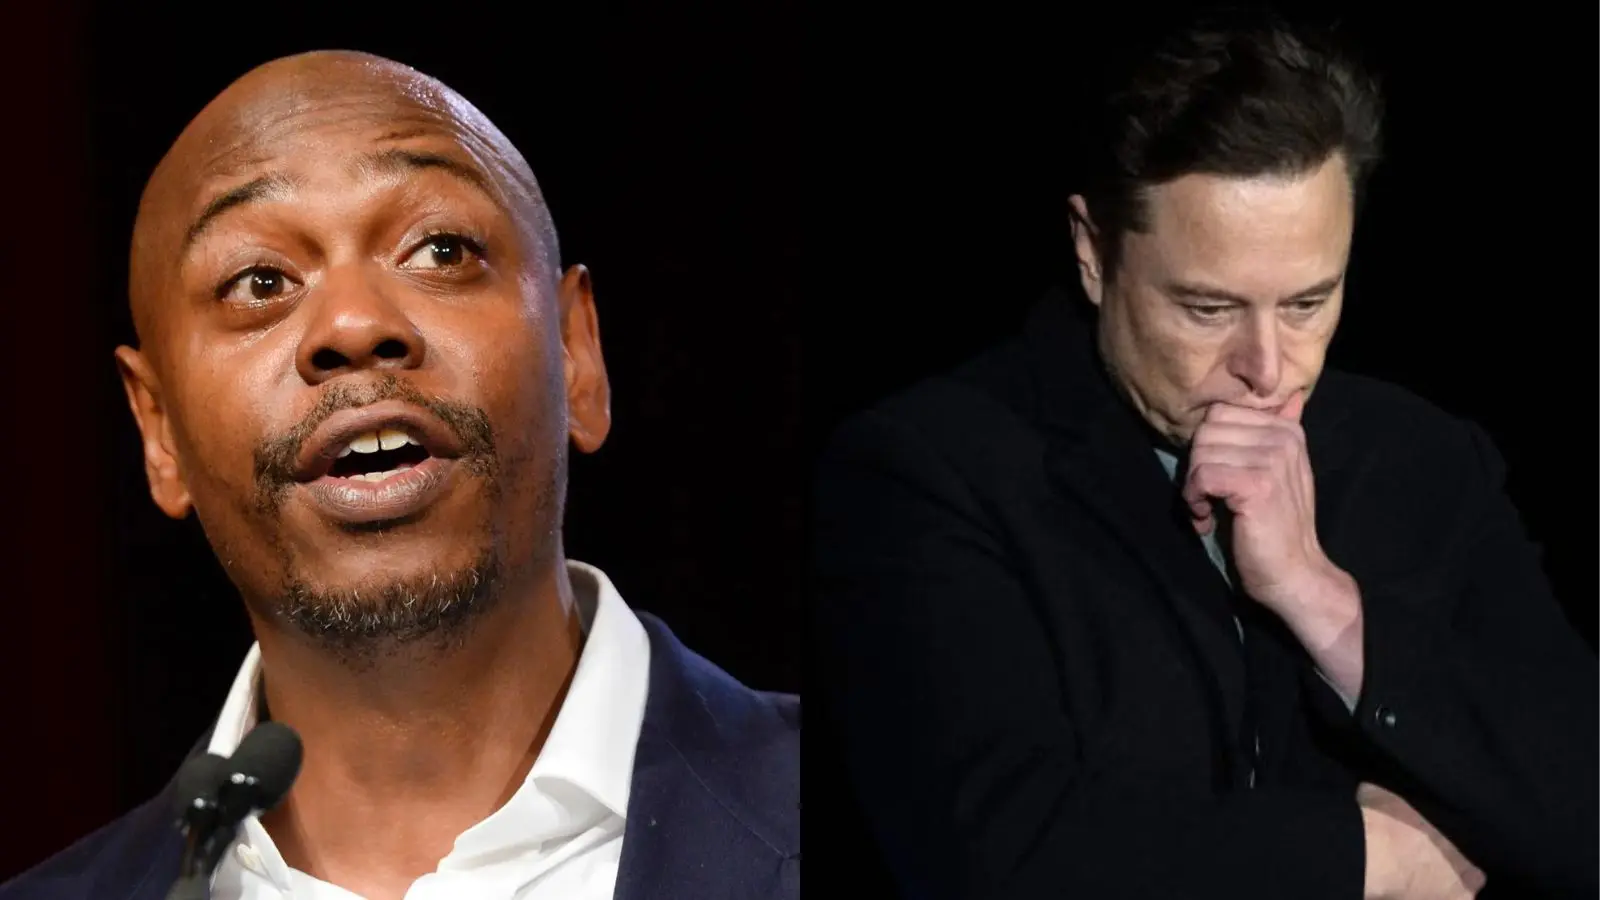 Elon Musk and Dave Chappele